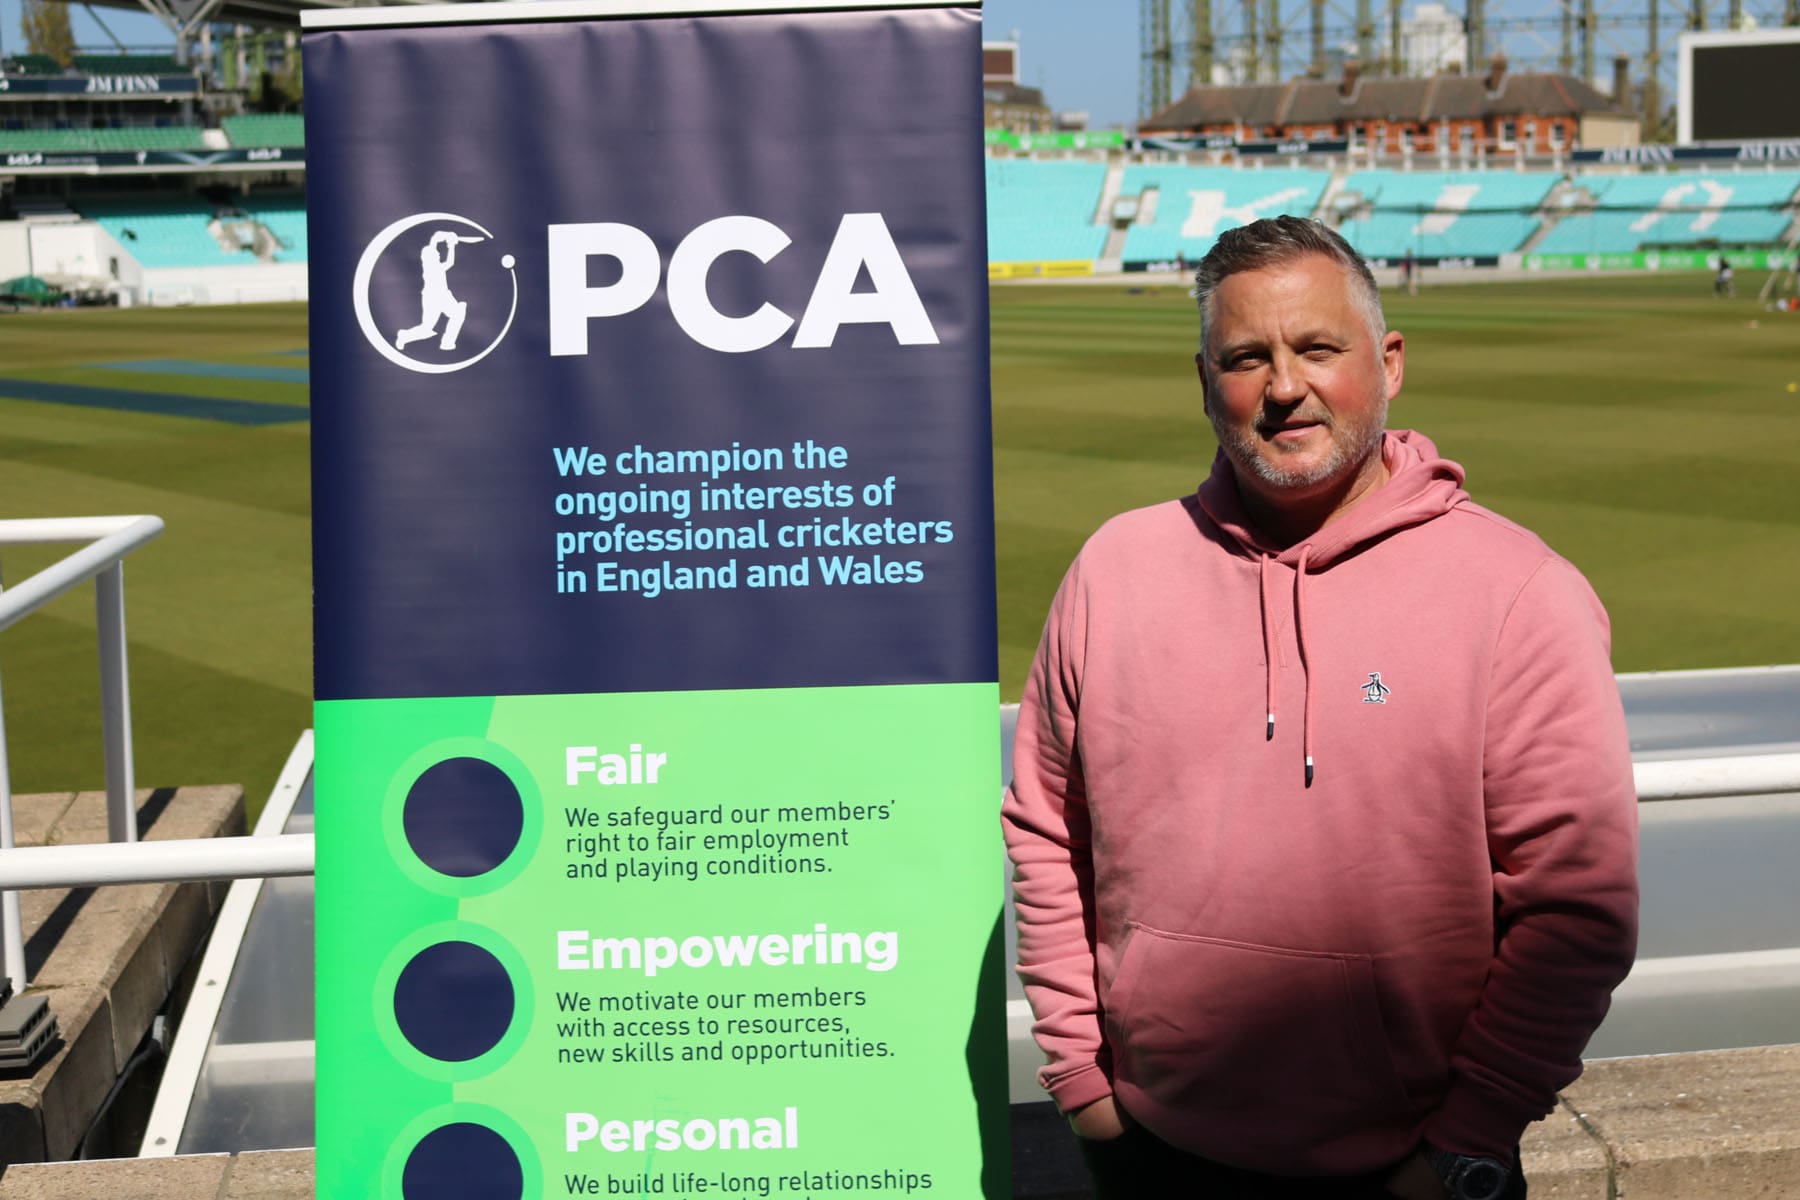 Gough appointed to PCA Board